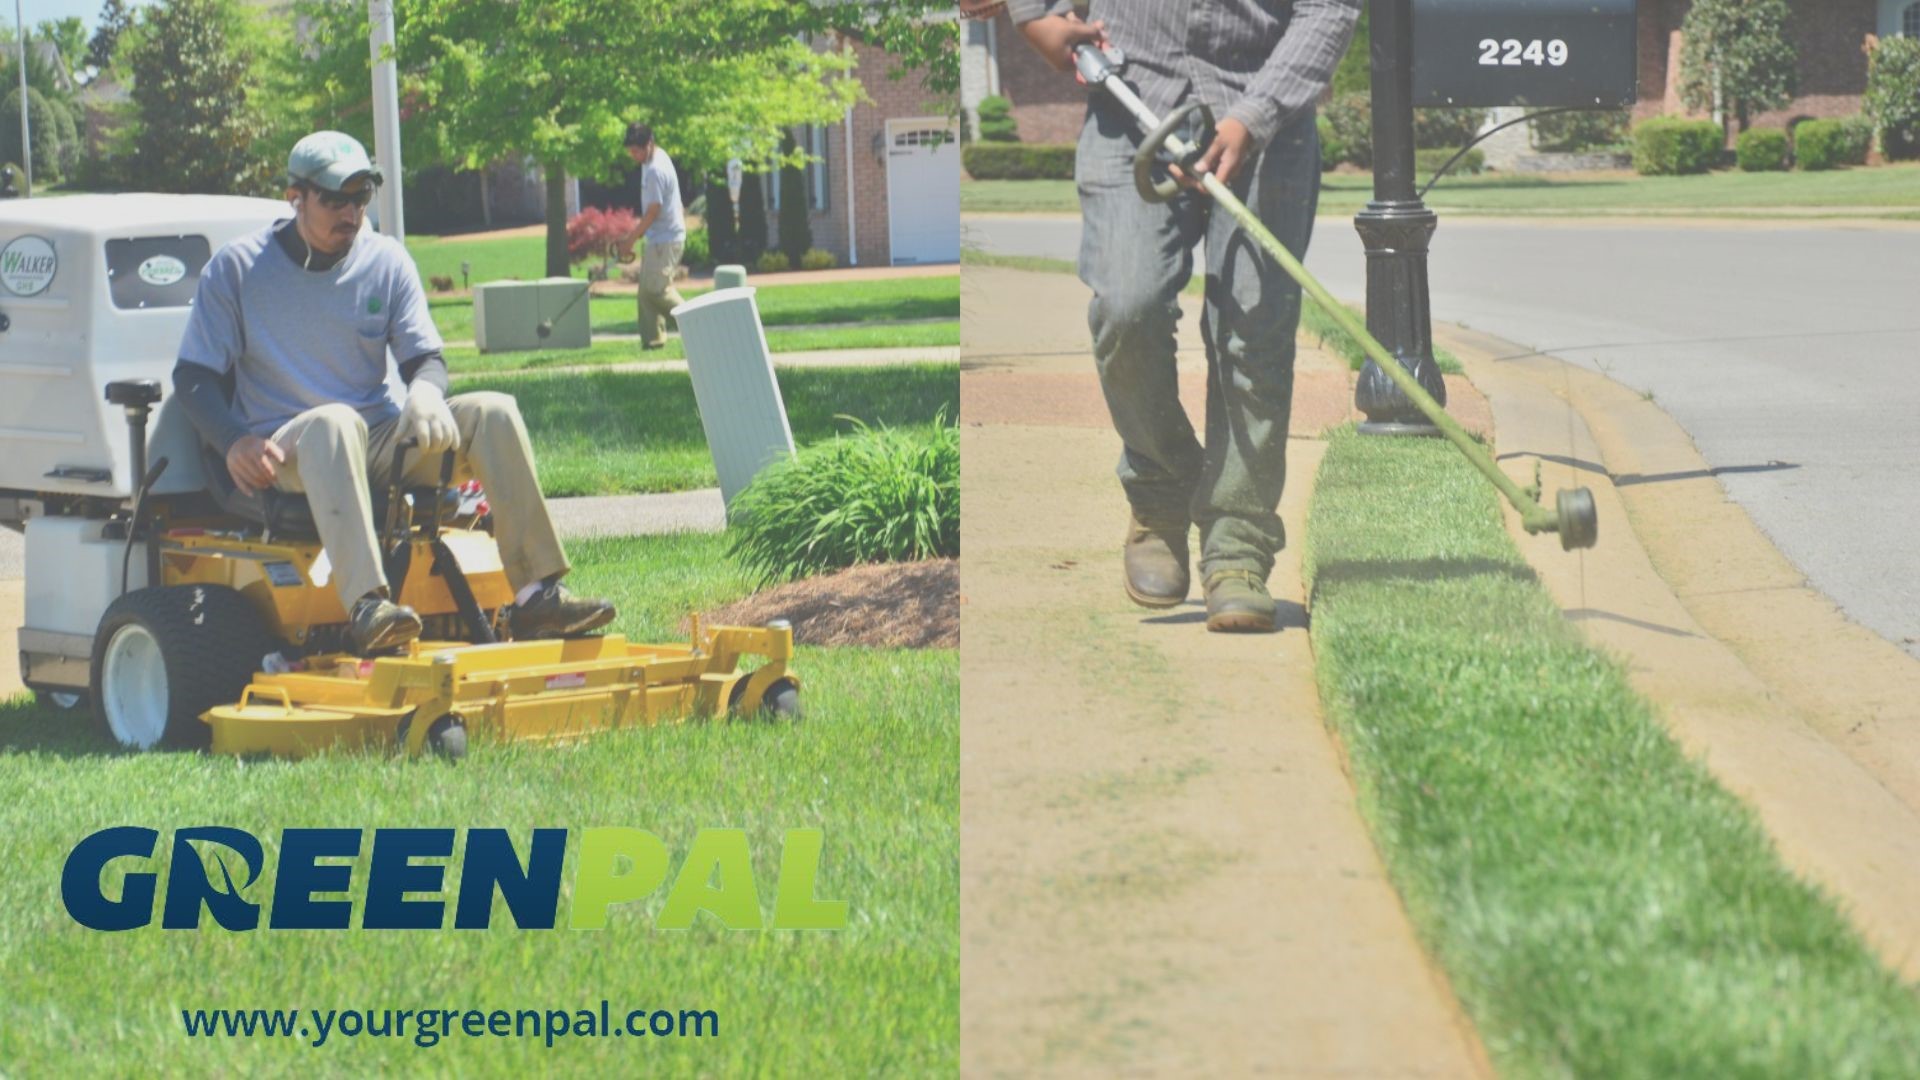 The app allows homeowners to easily find and hire reliable and safe lawn care services.